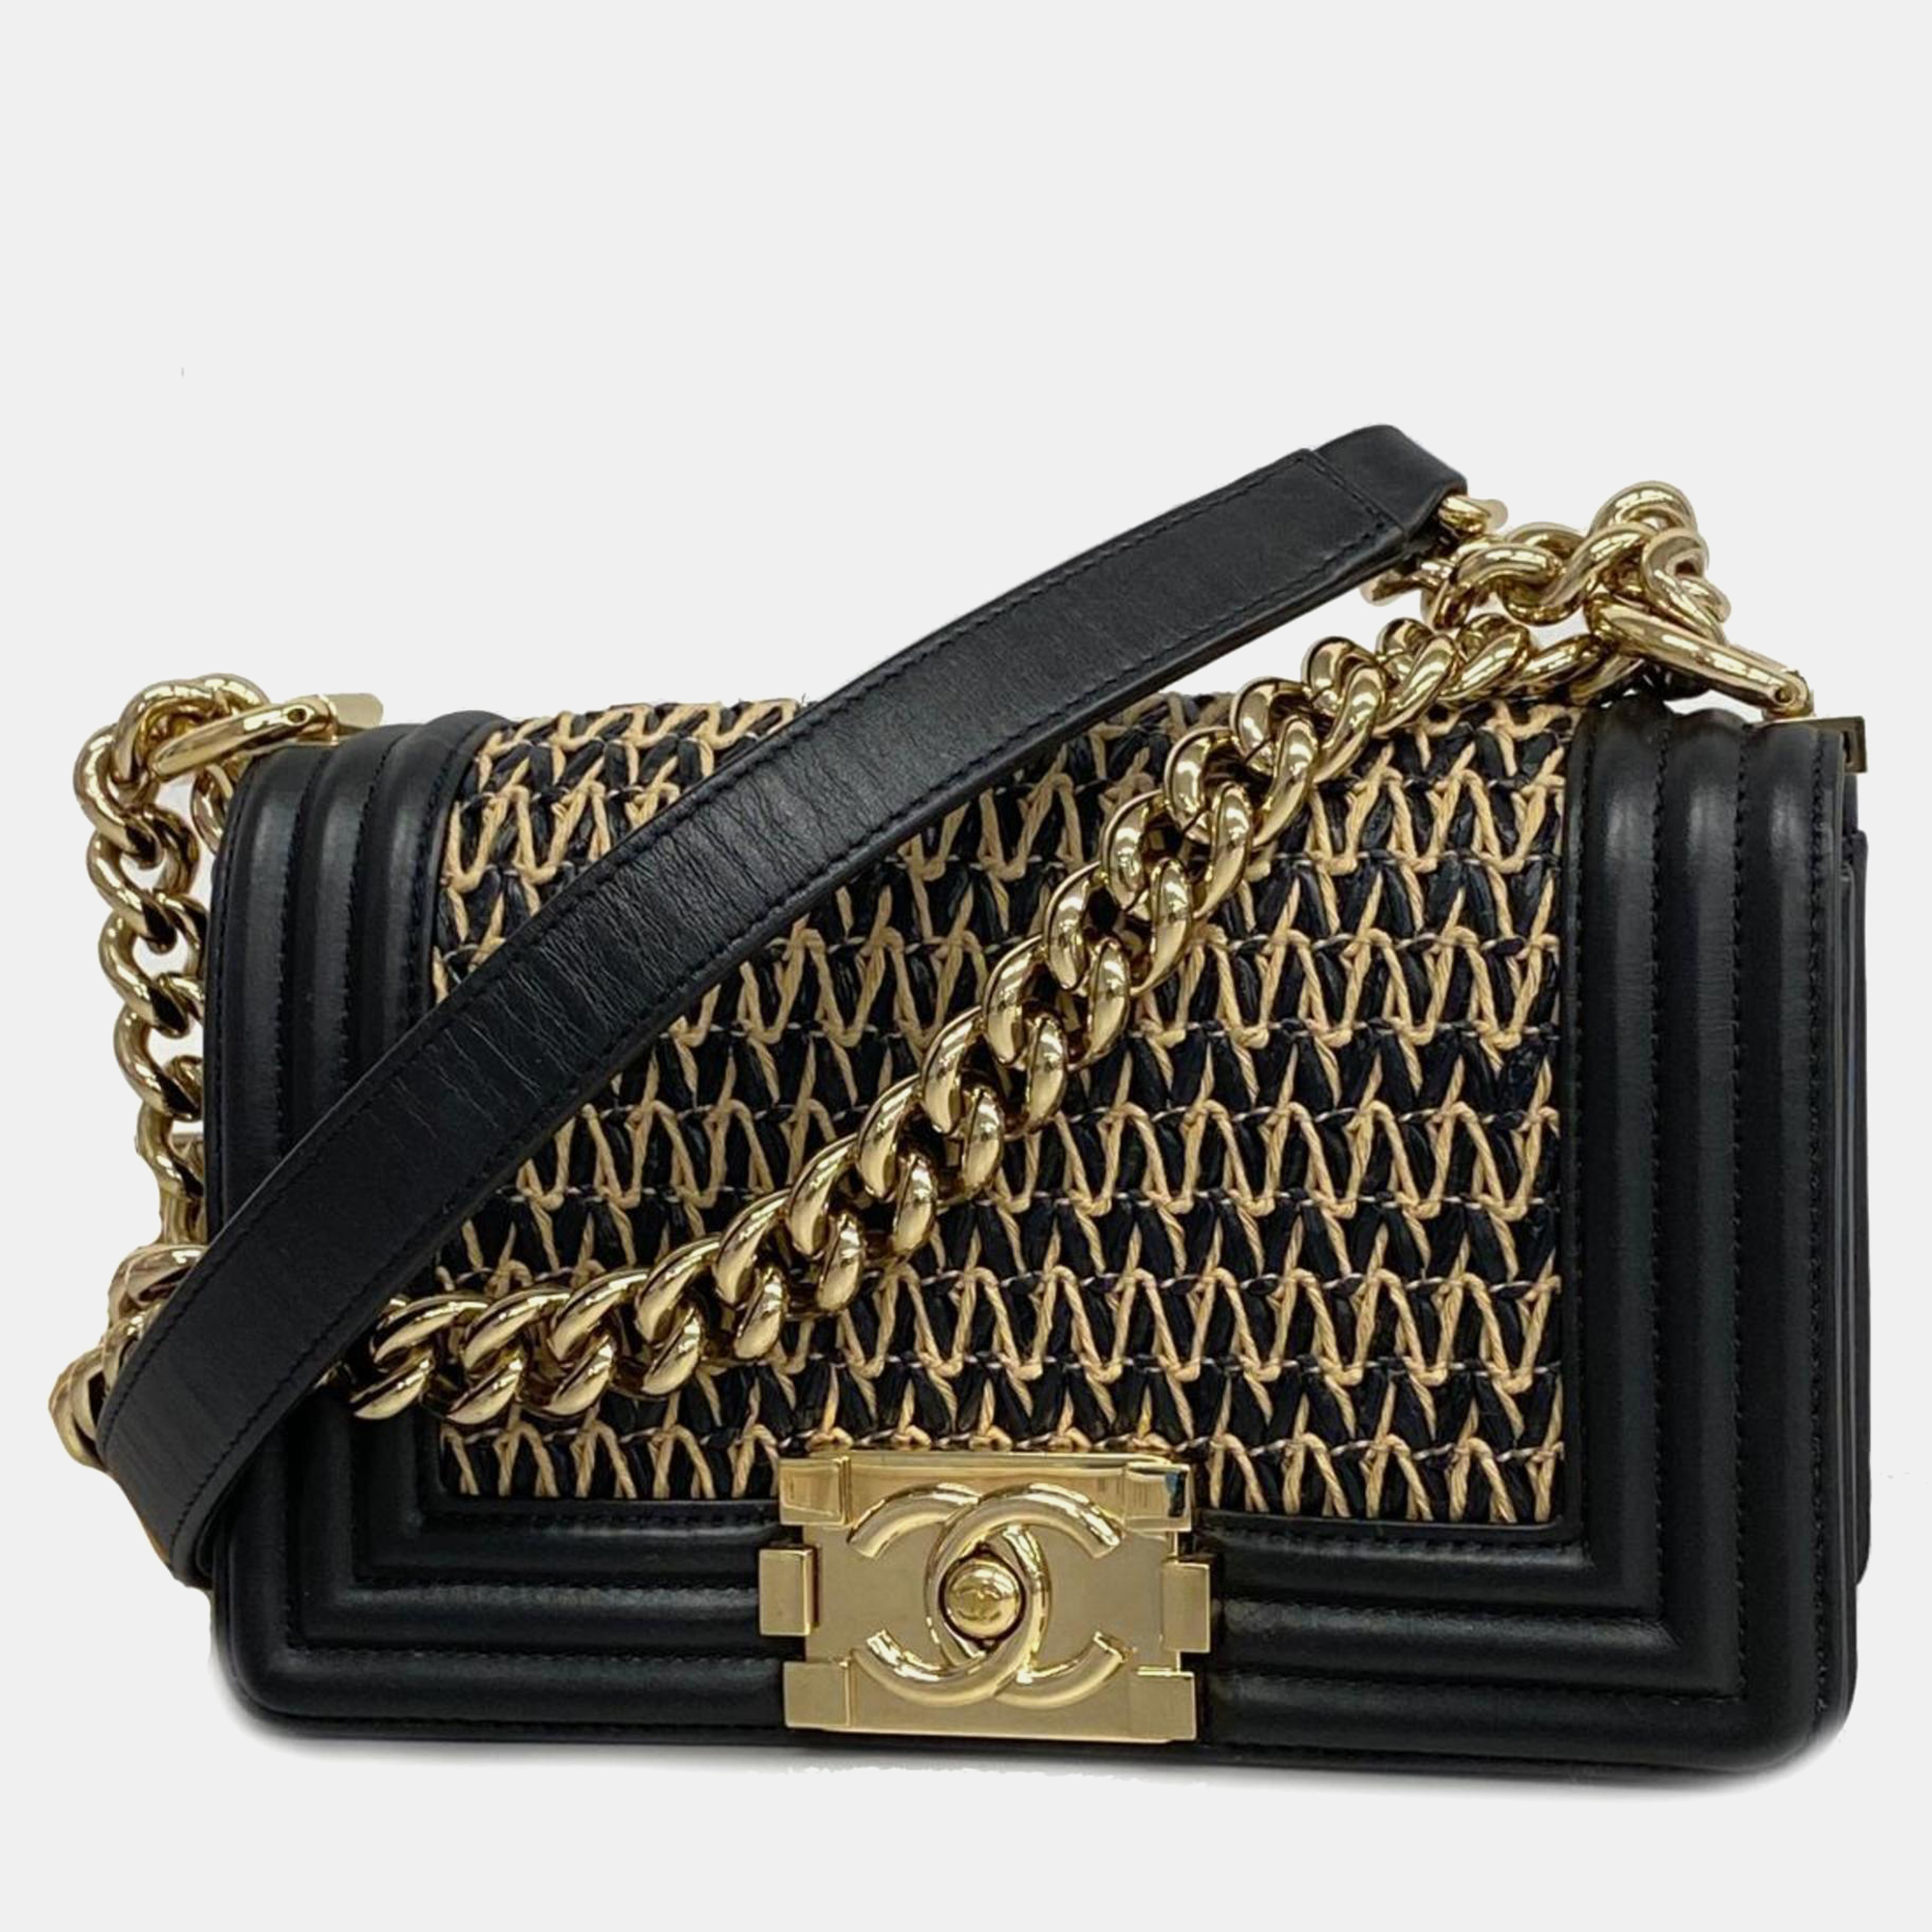 Chanel chevron woven raffia and leather old small boy flap bag